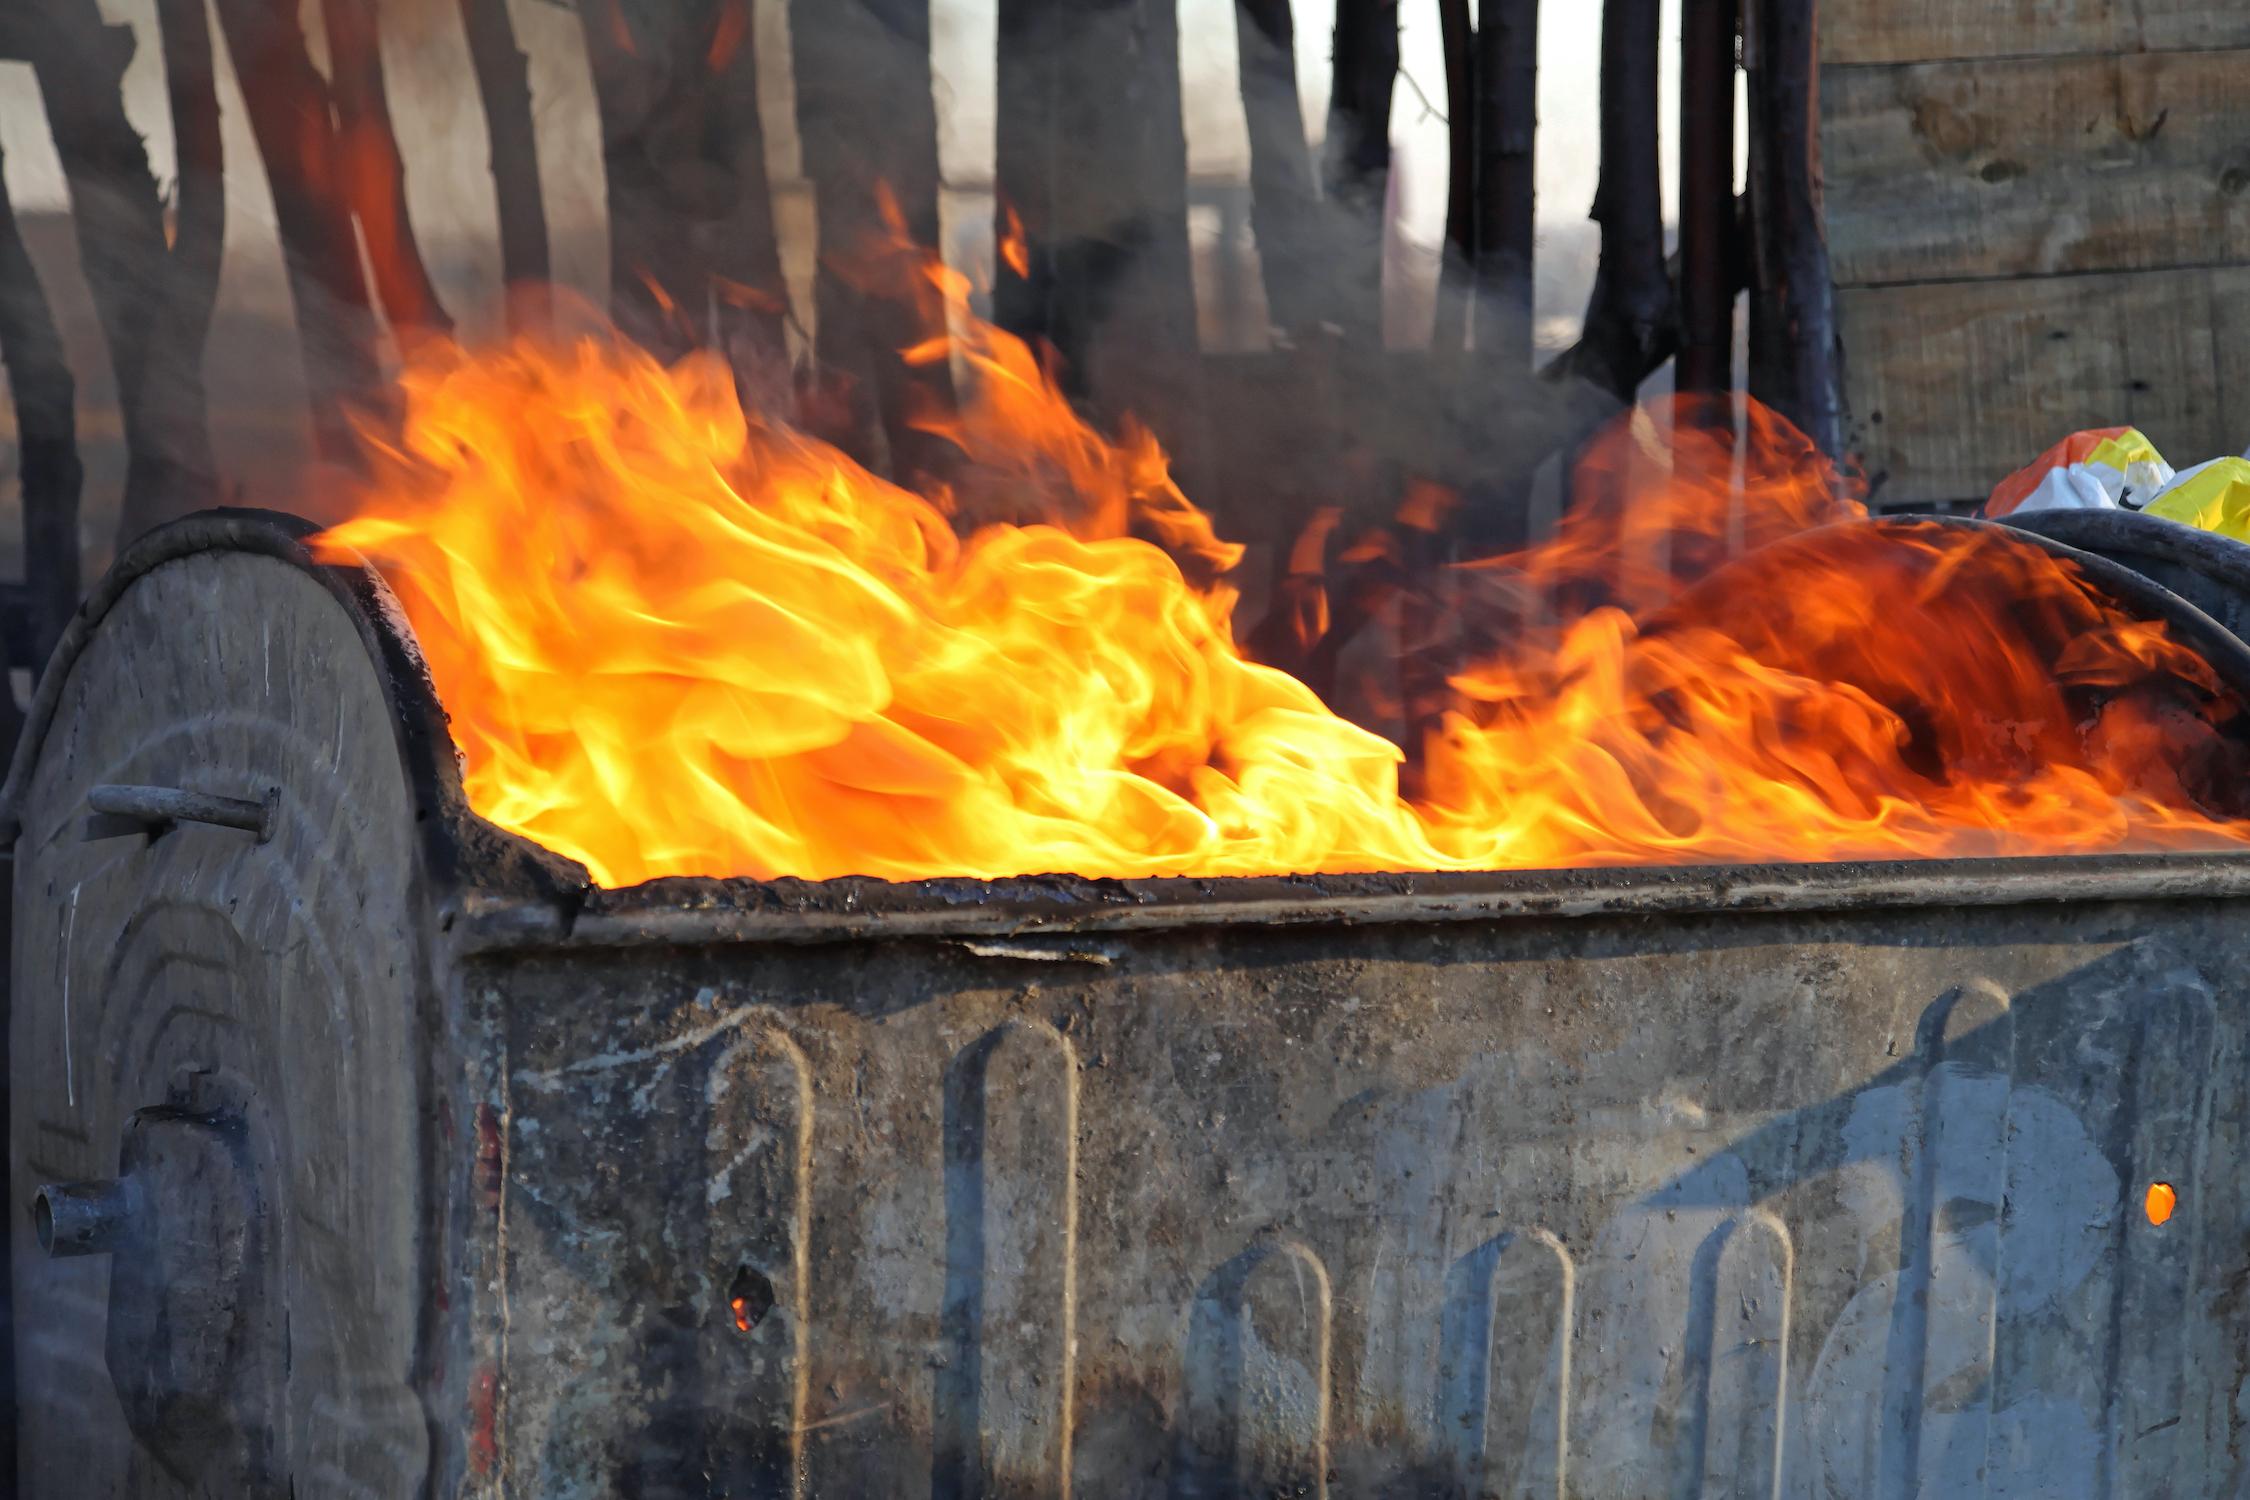 Burning trask in a dumpster